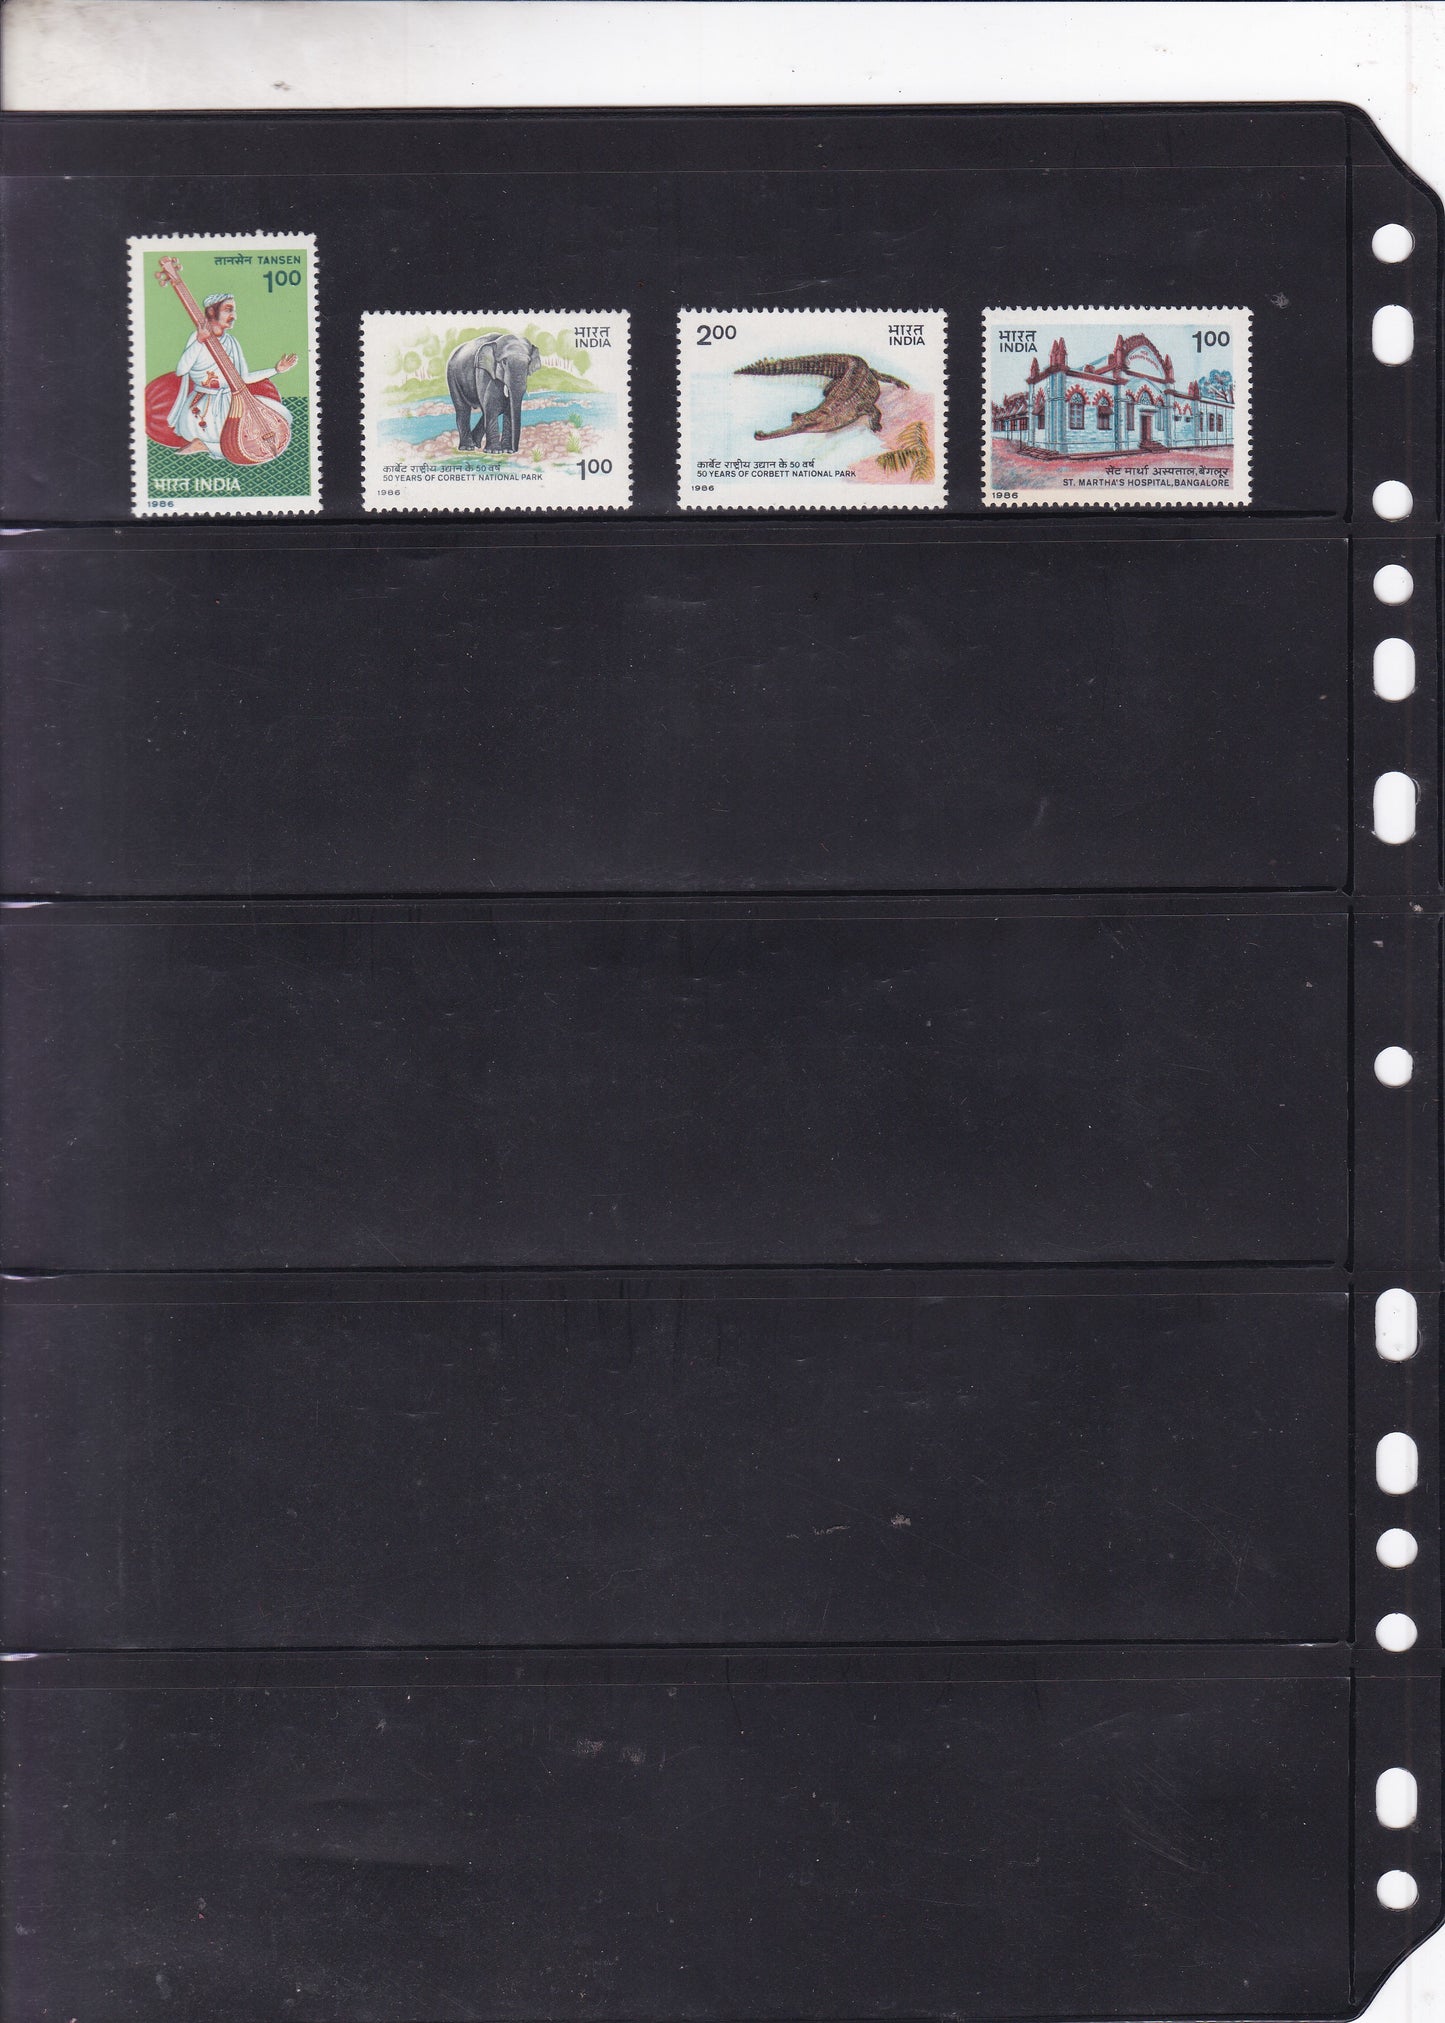 India-1986 Full Year pack MNH Stamps